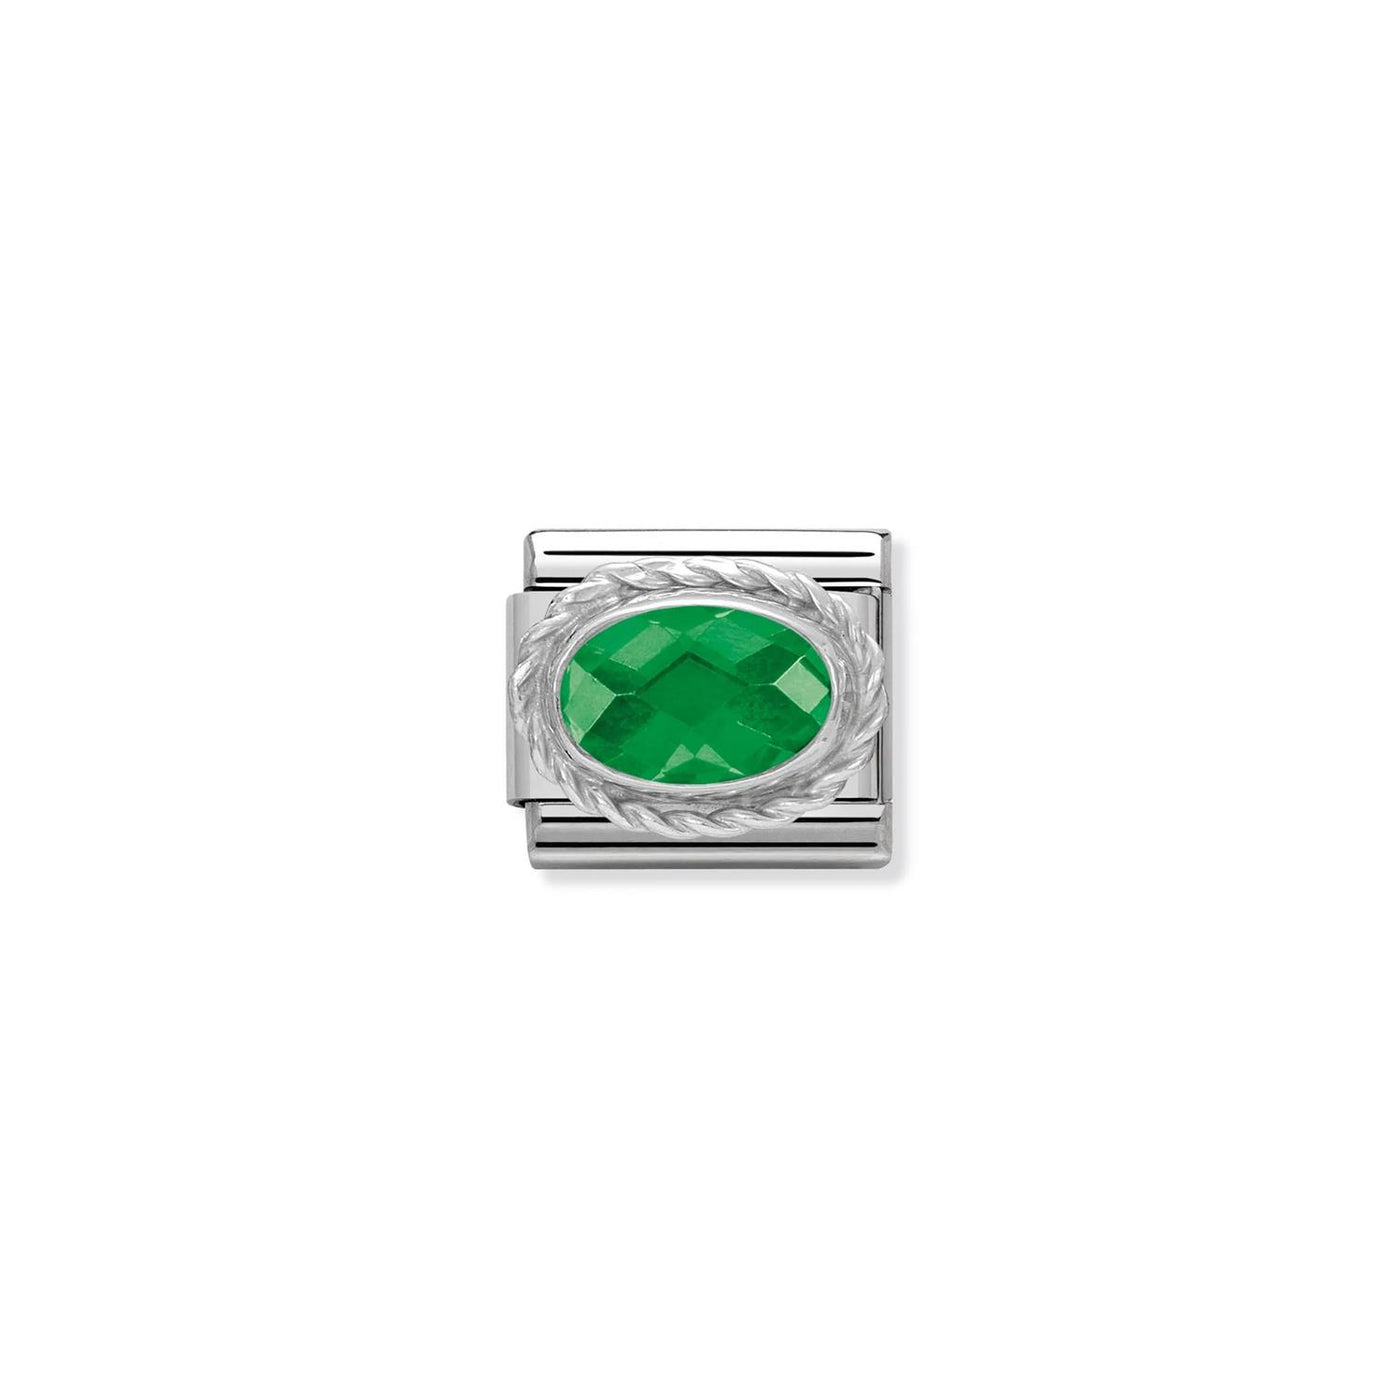 Faceted CZ 925 sterling silver setting and CZ Emerald Green